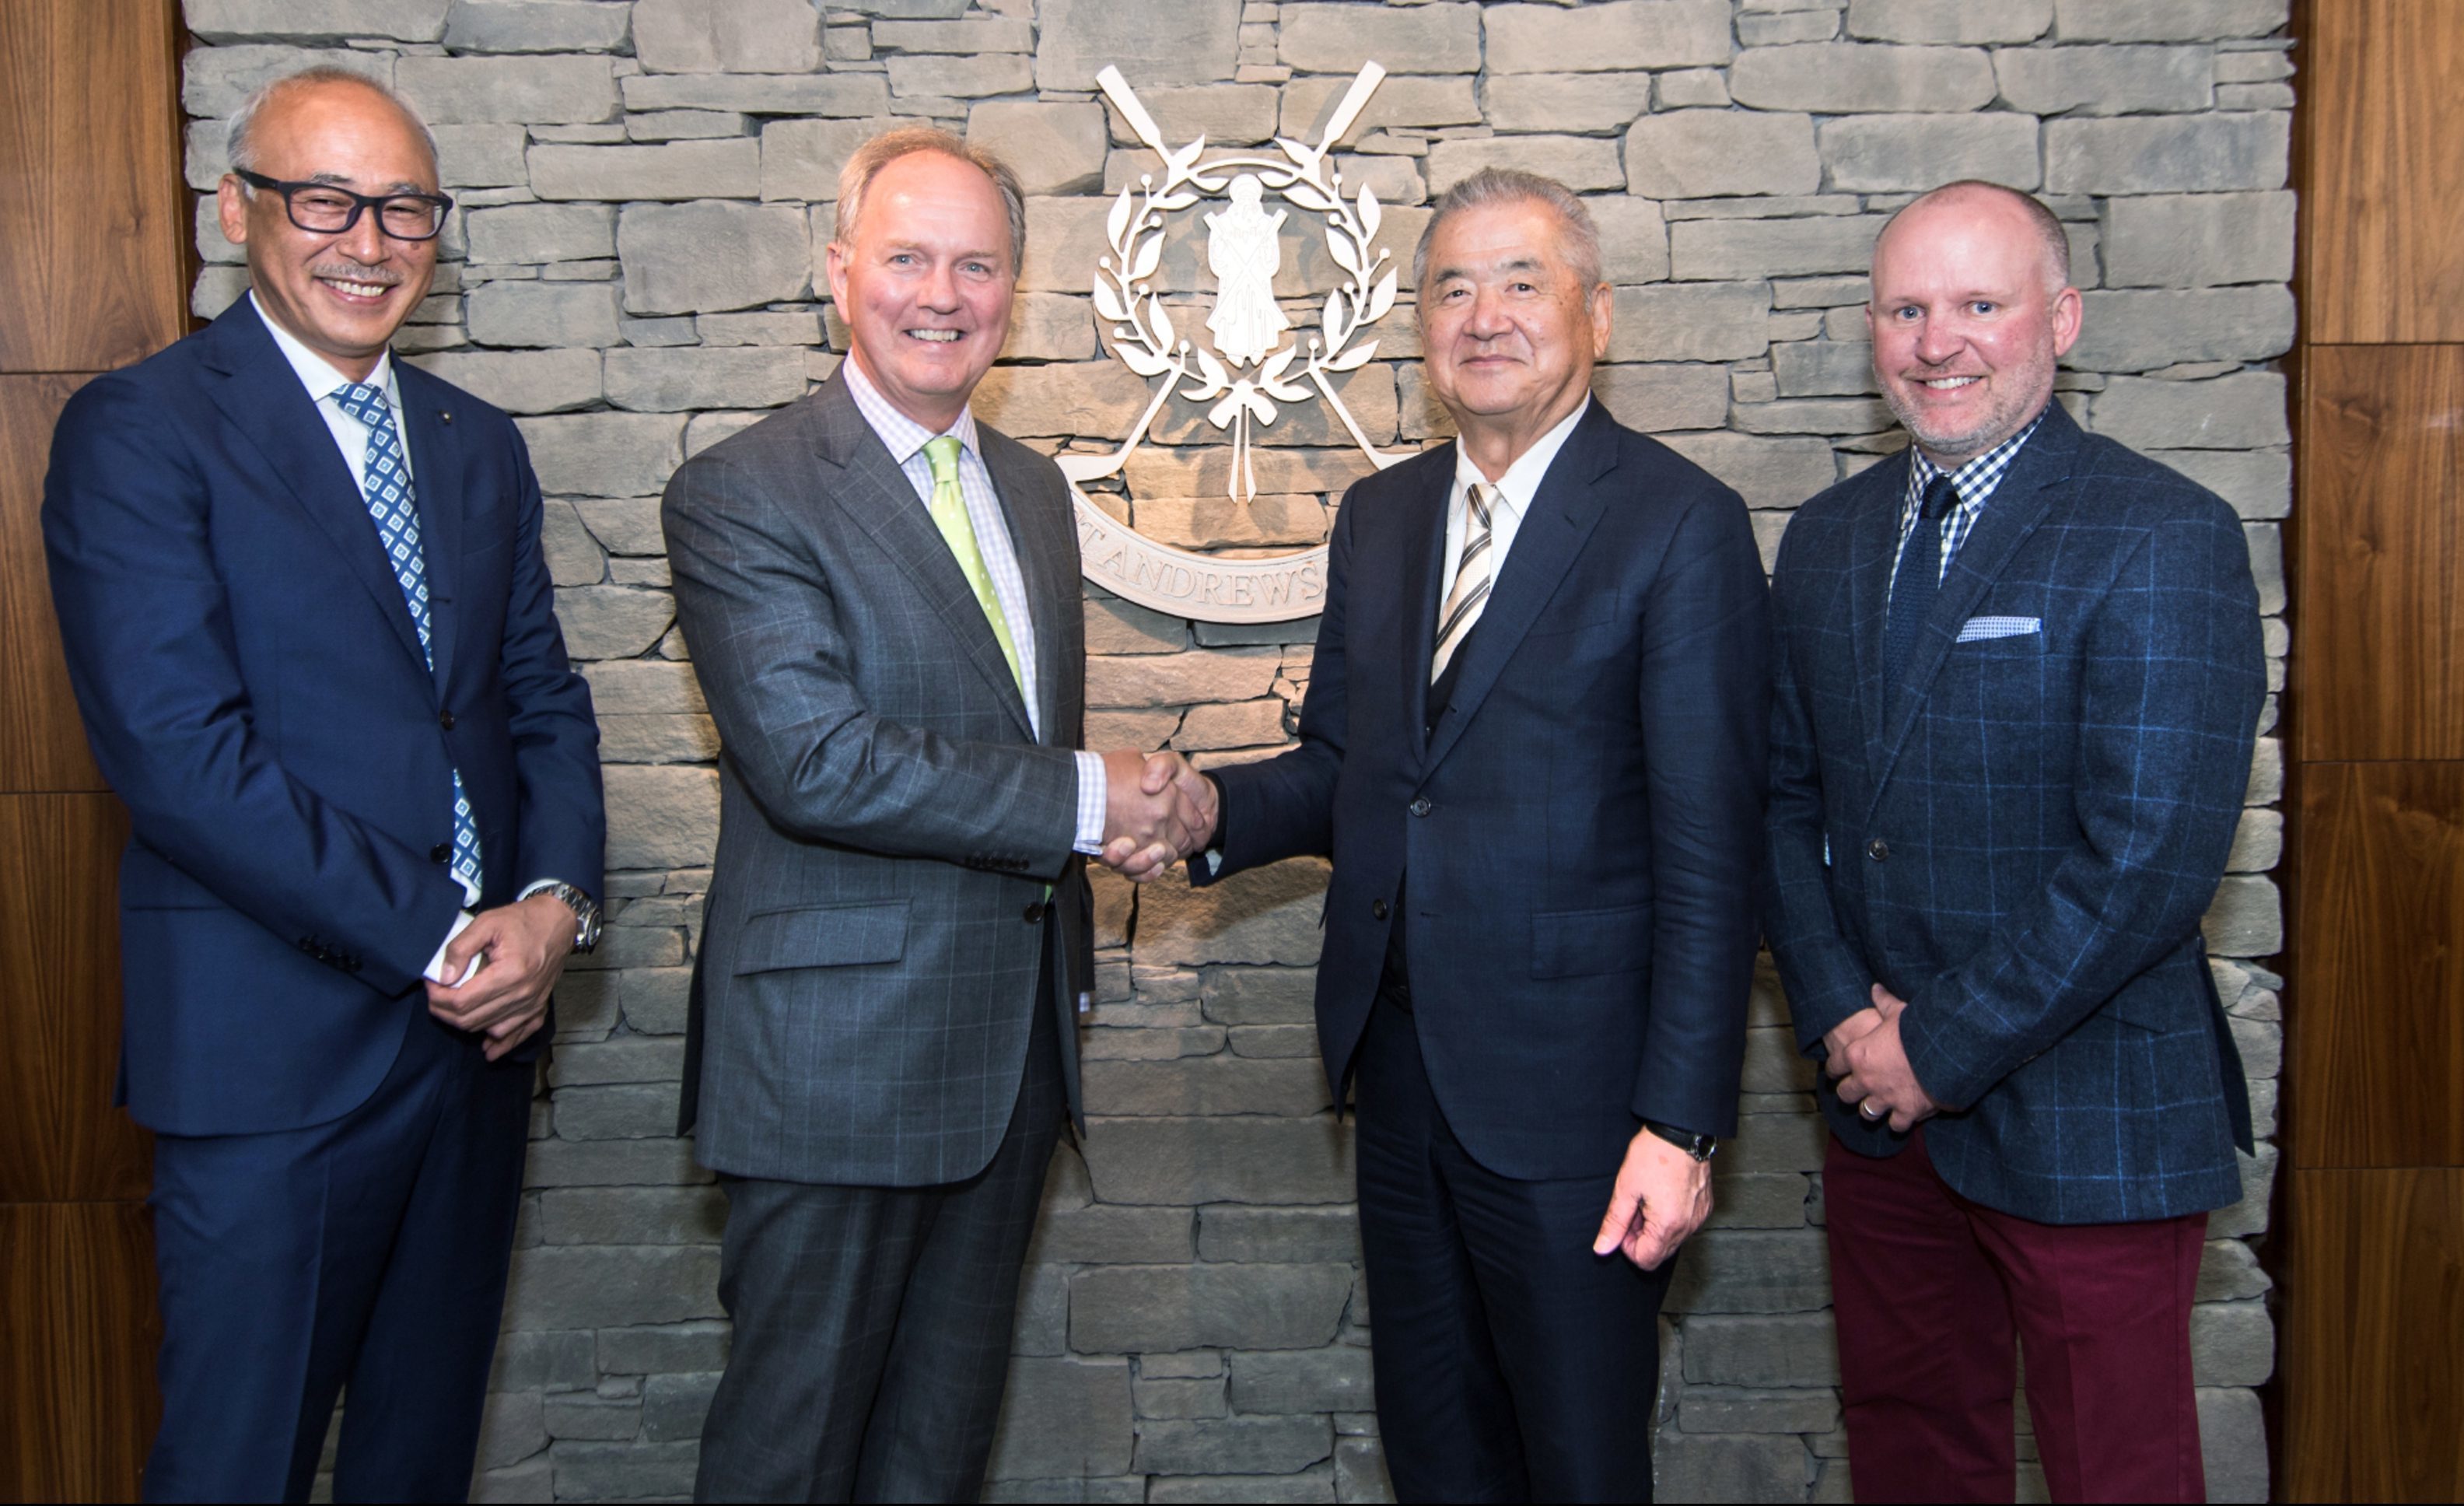 Manabu Senza,  president TSI Groove & Sports, St Andrews Links CEO Euan Loudon, Masahiko Miyake, chairman TSI Holdings,  and Danny Campbell, commercial director St Andrews Links celebrate the new partnership.